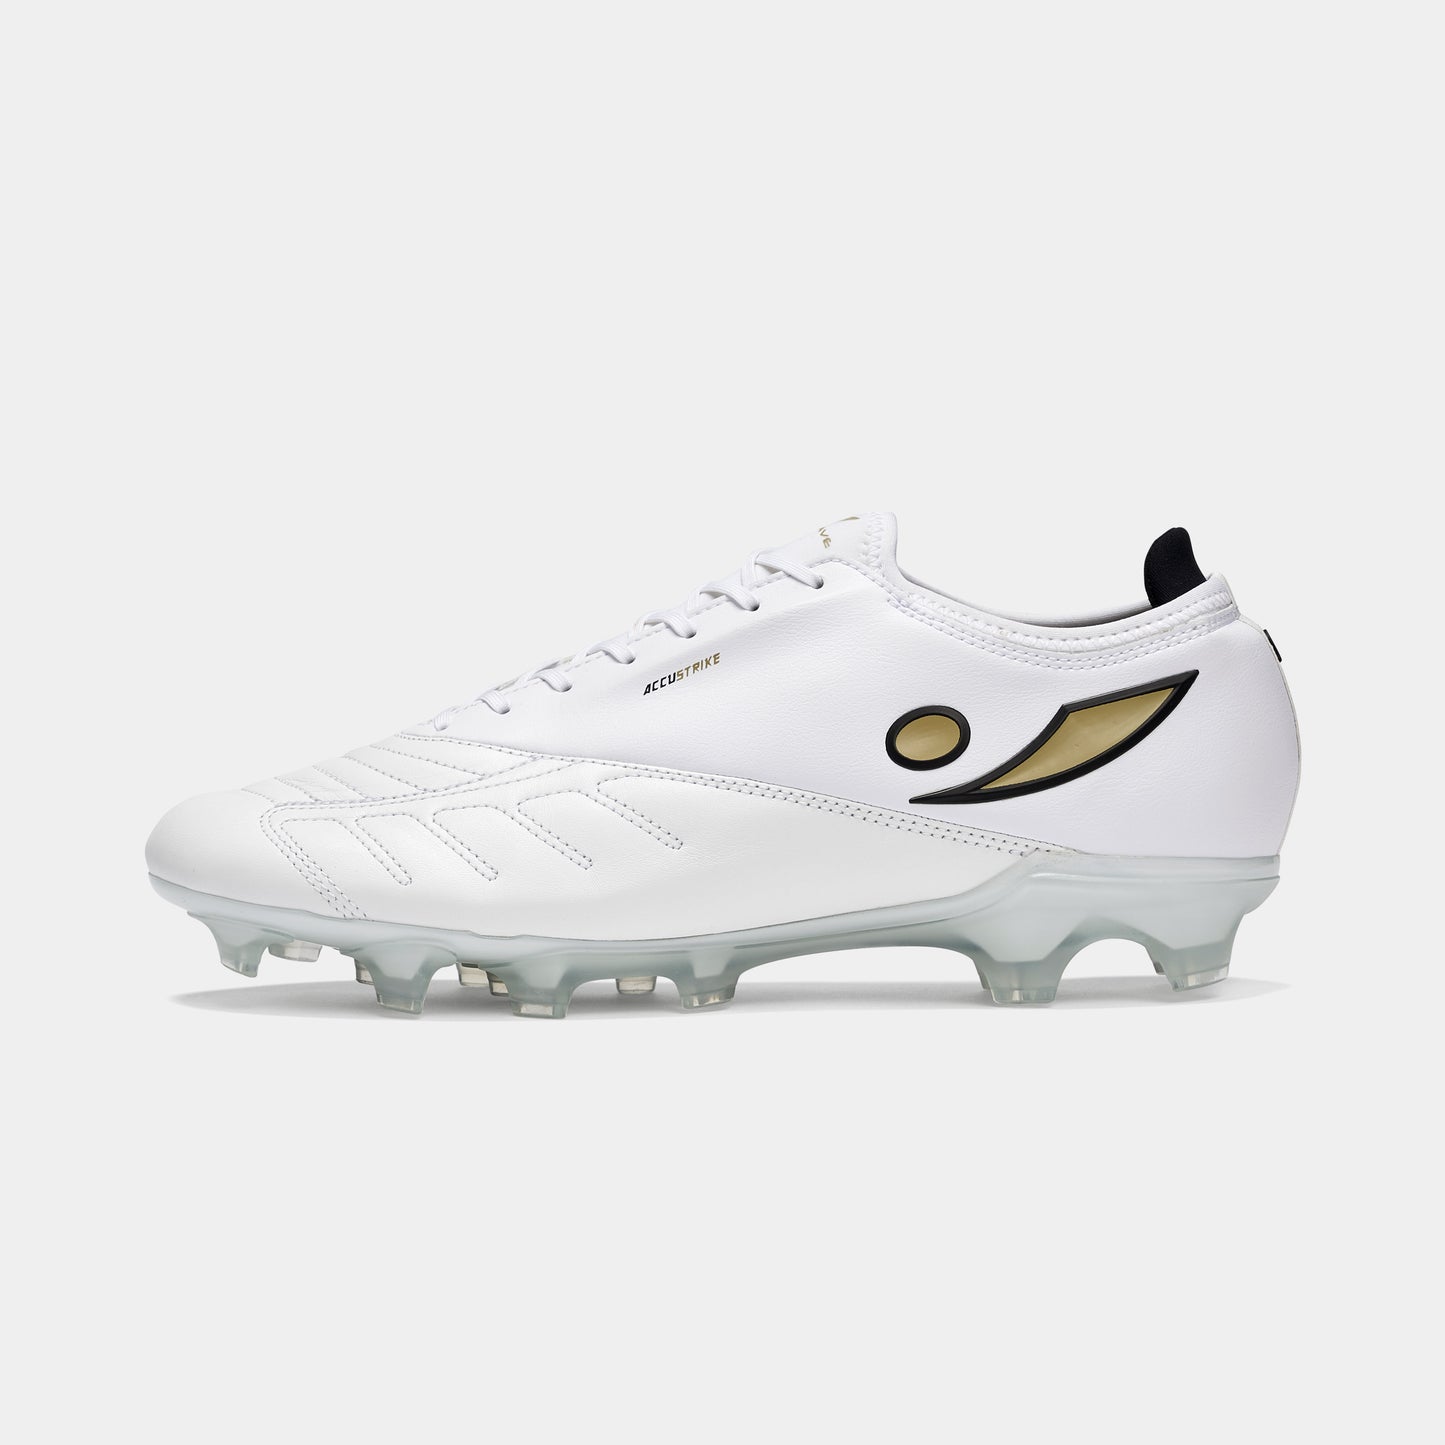 Concave Halo + Cave Gang FG – White/Black/Gold